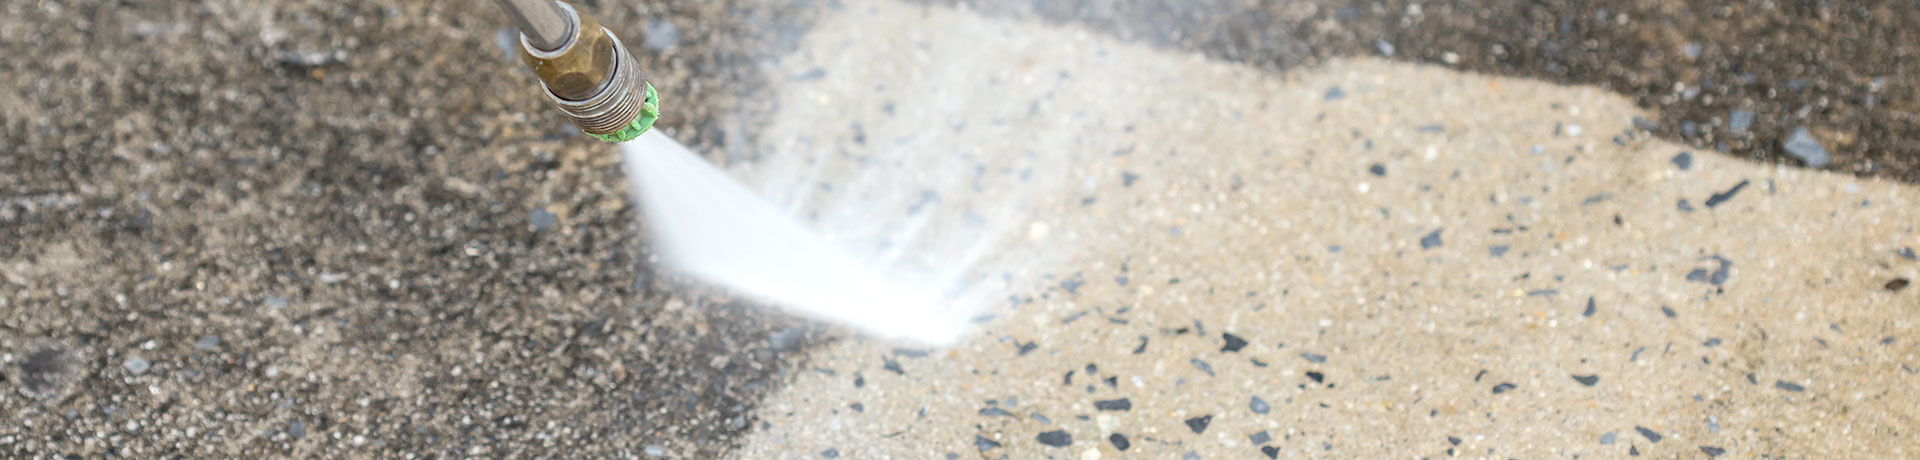 A close up image of the nozzle spraying water at high pressure to remove stubborn stains off concrete